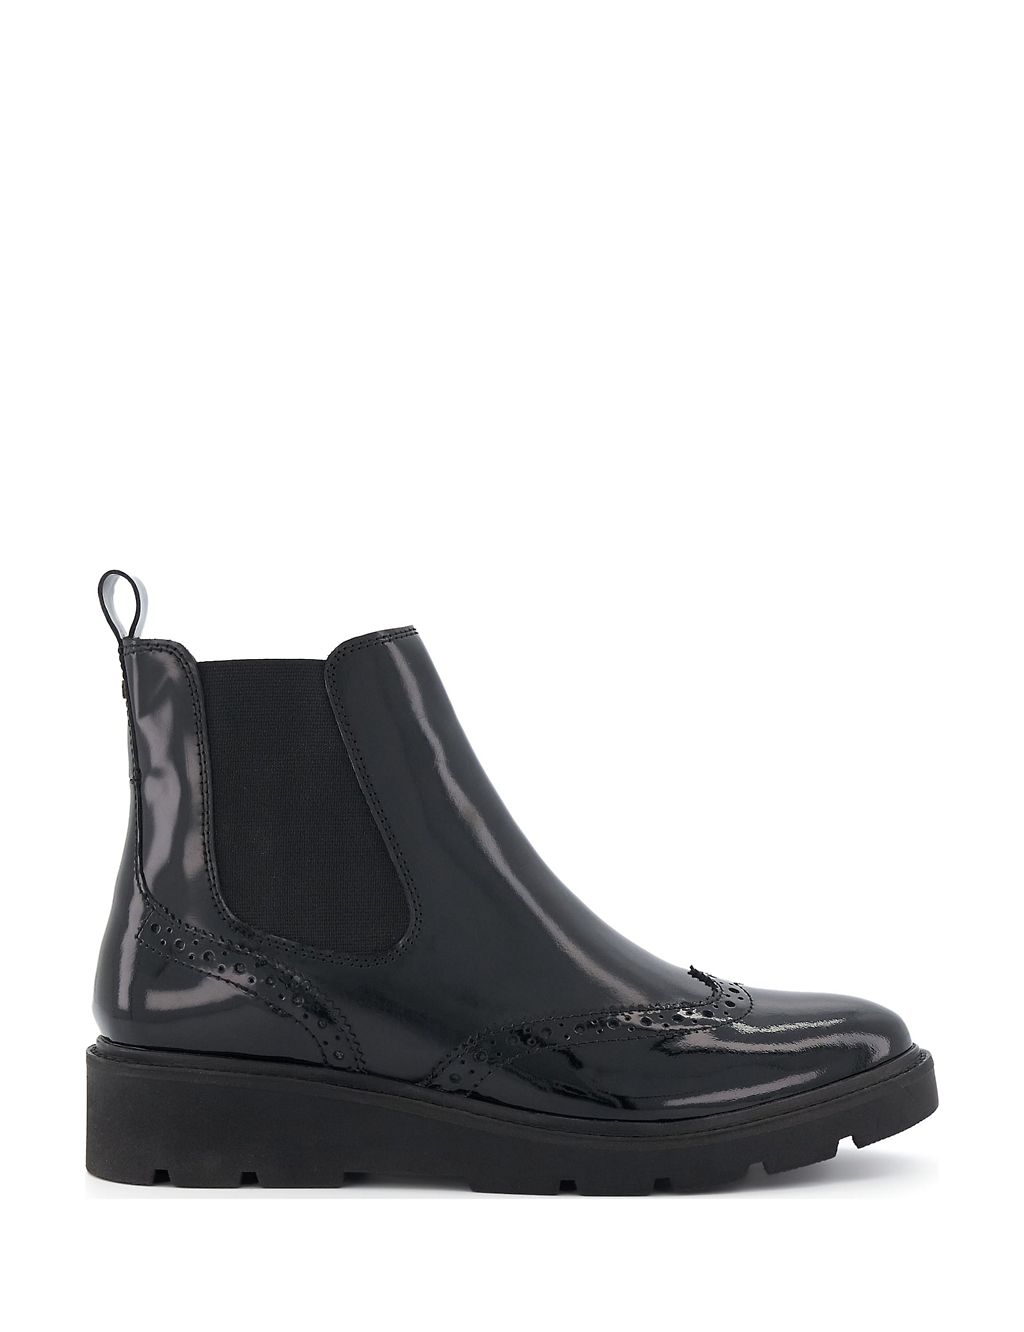 Leather Chelsea Brogue Detail Wedge Boots | Dune London | M&S